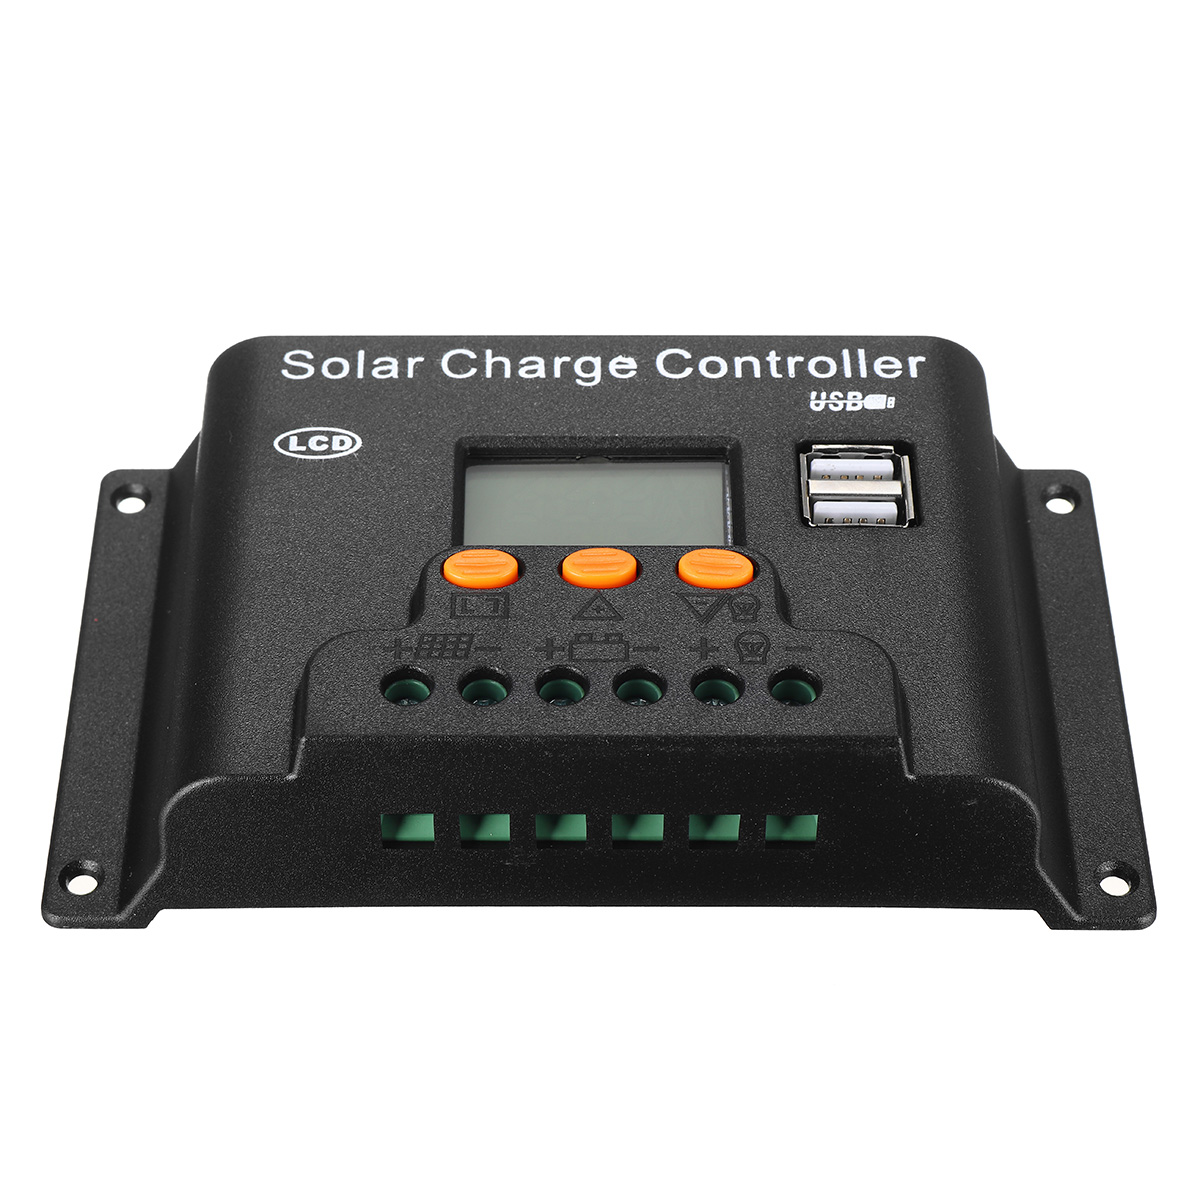 10/20/30/40/50/60A 12v/24v Adjust PWN Solar Battery Charge Controller for Solar Panel Support Dual USB Output/Large LCD Display 23